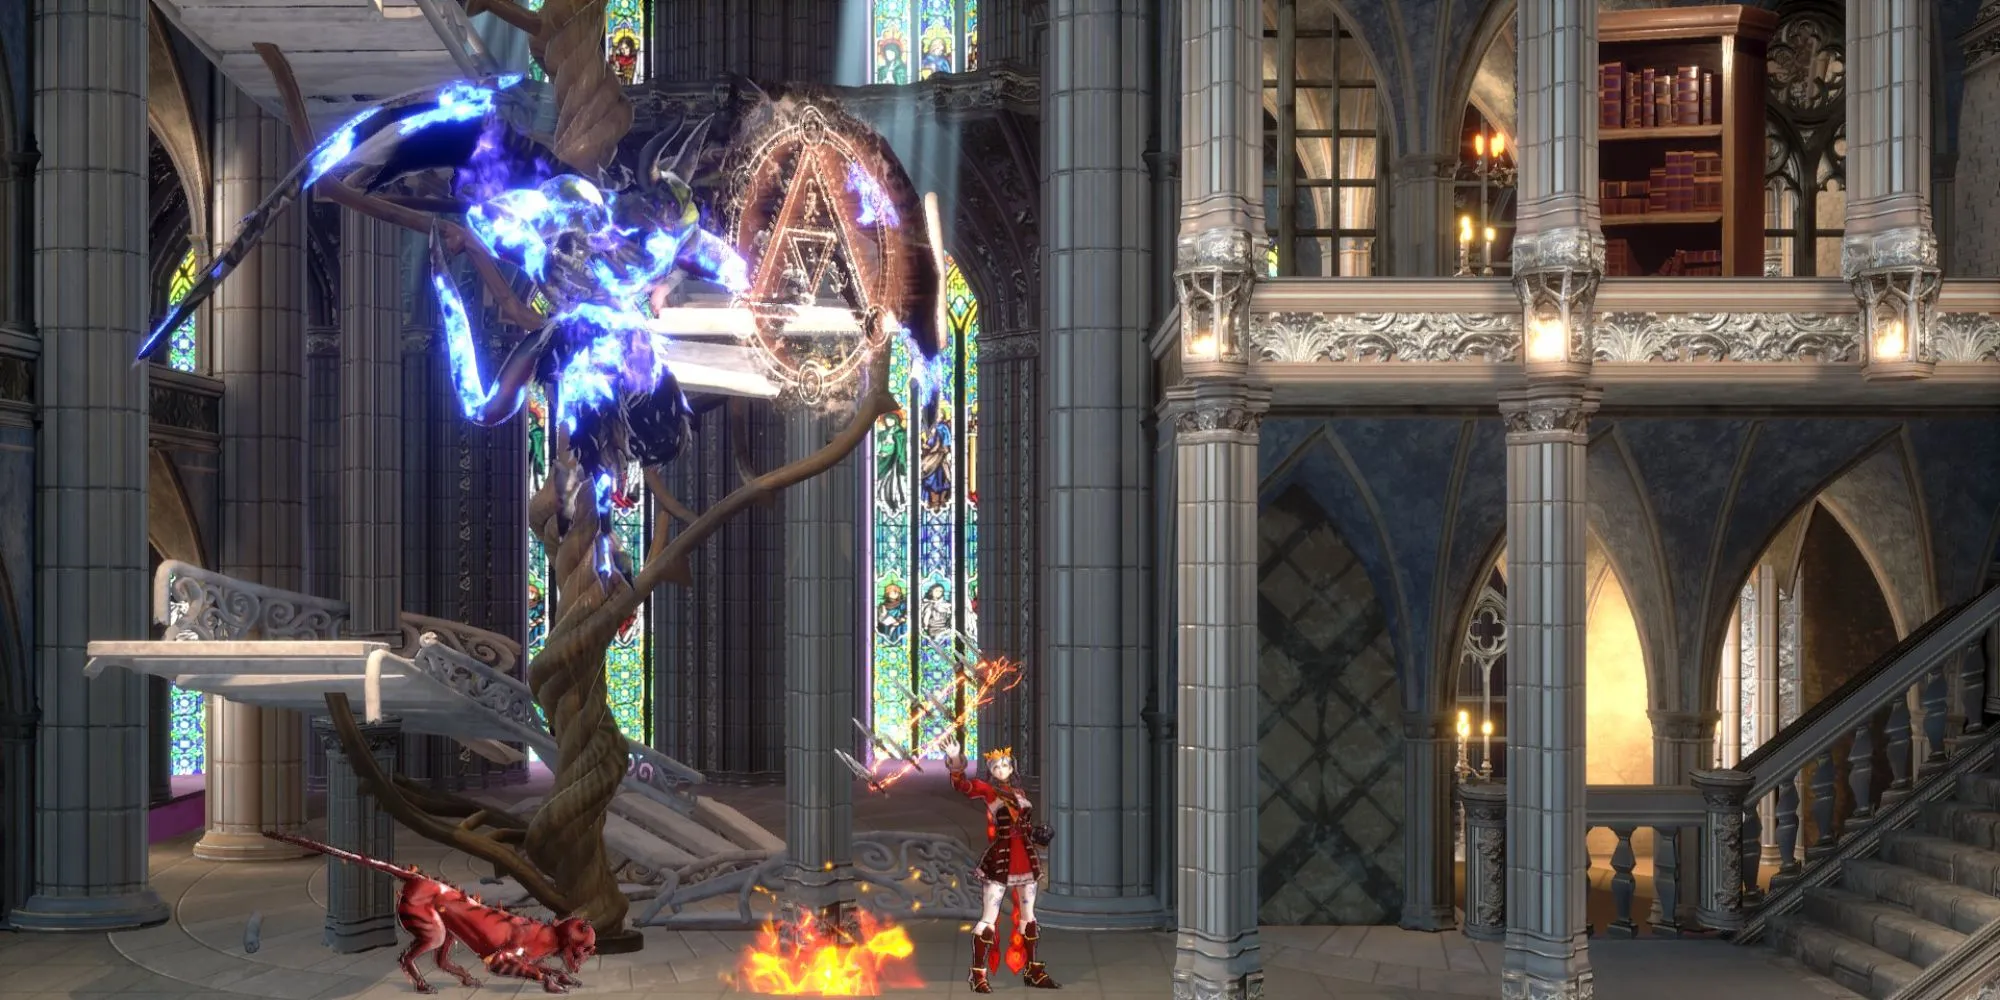 Protagonista de Bloodstained Ritual of the Night luchando